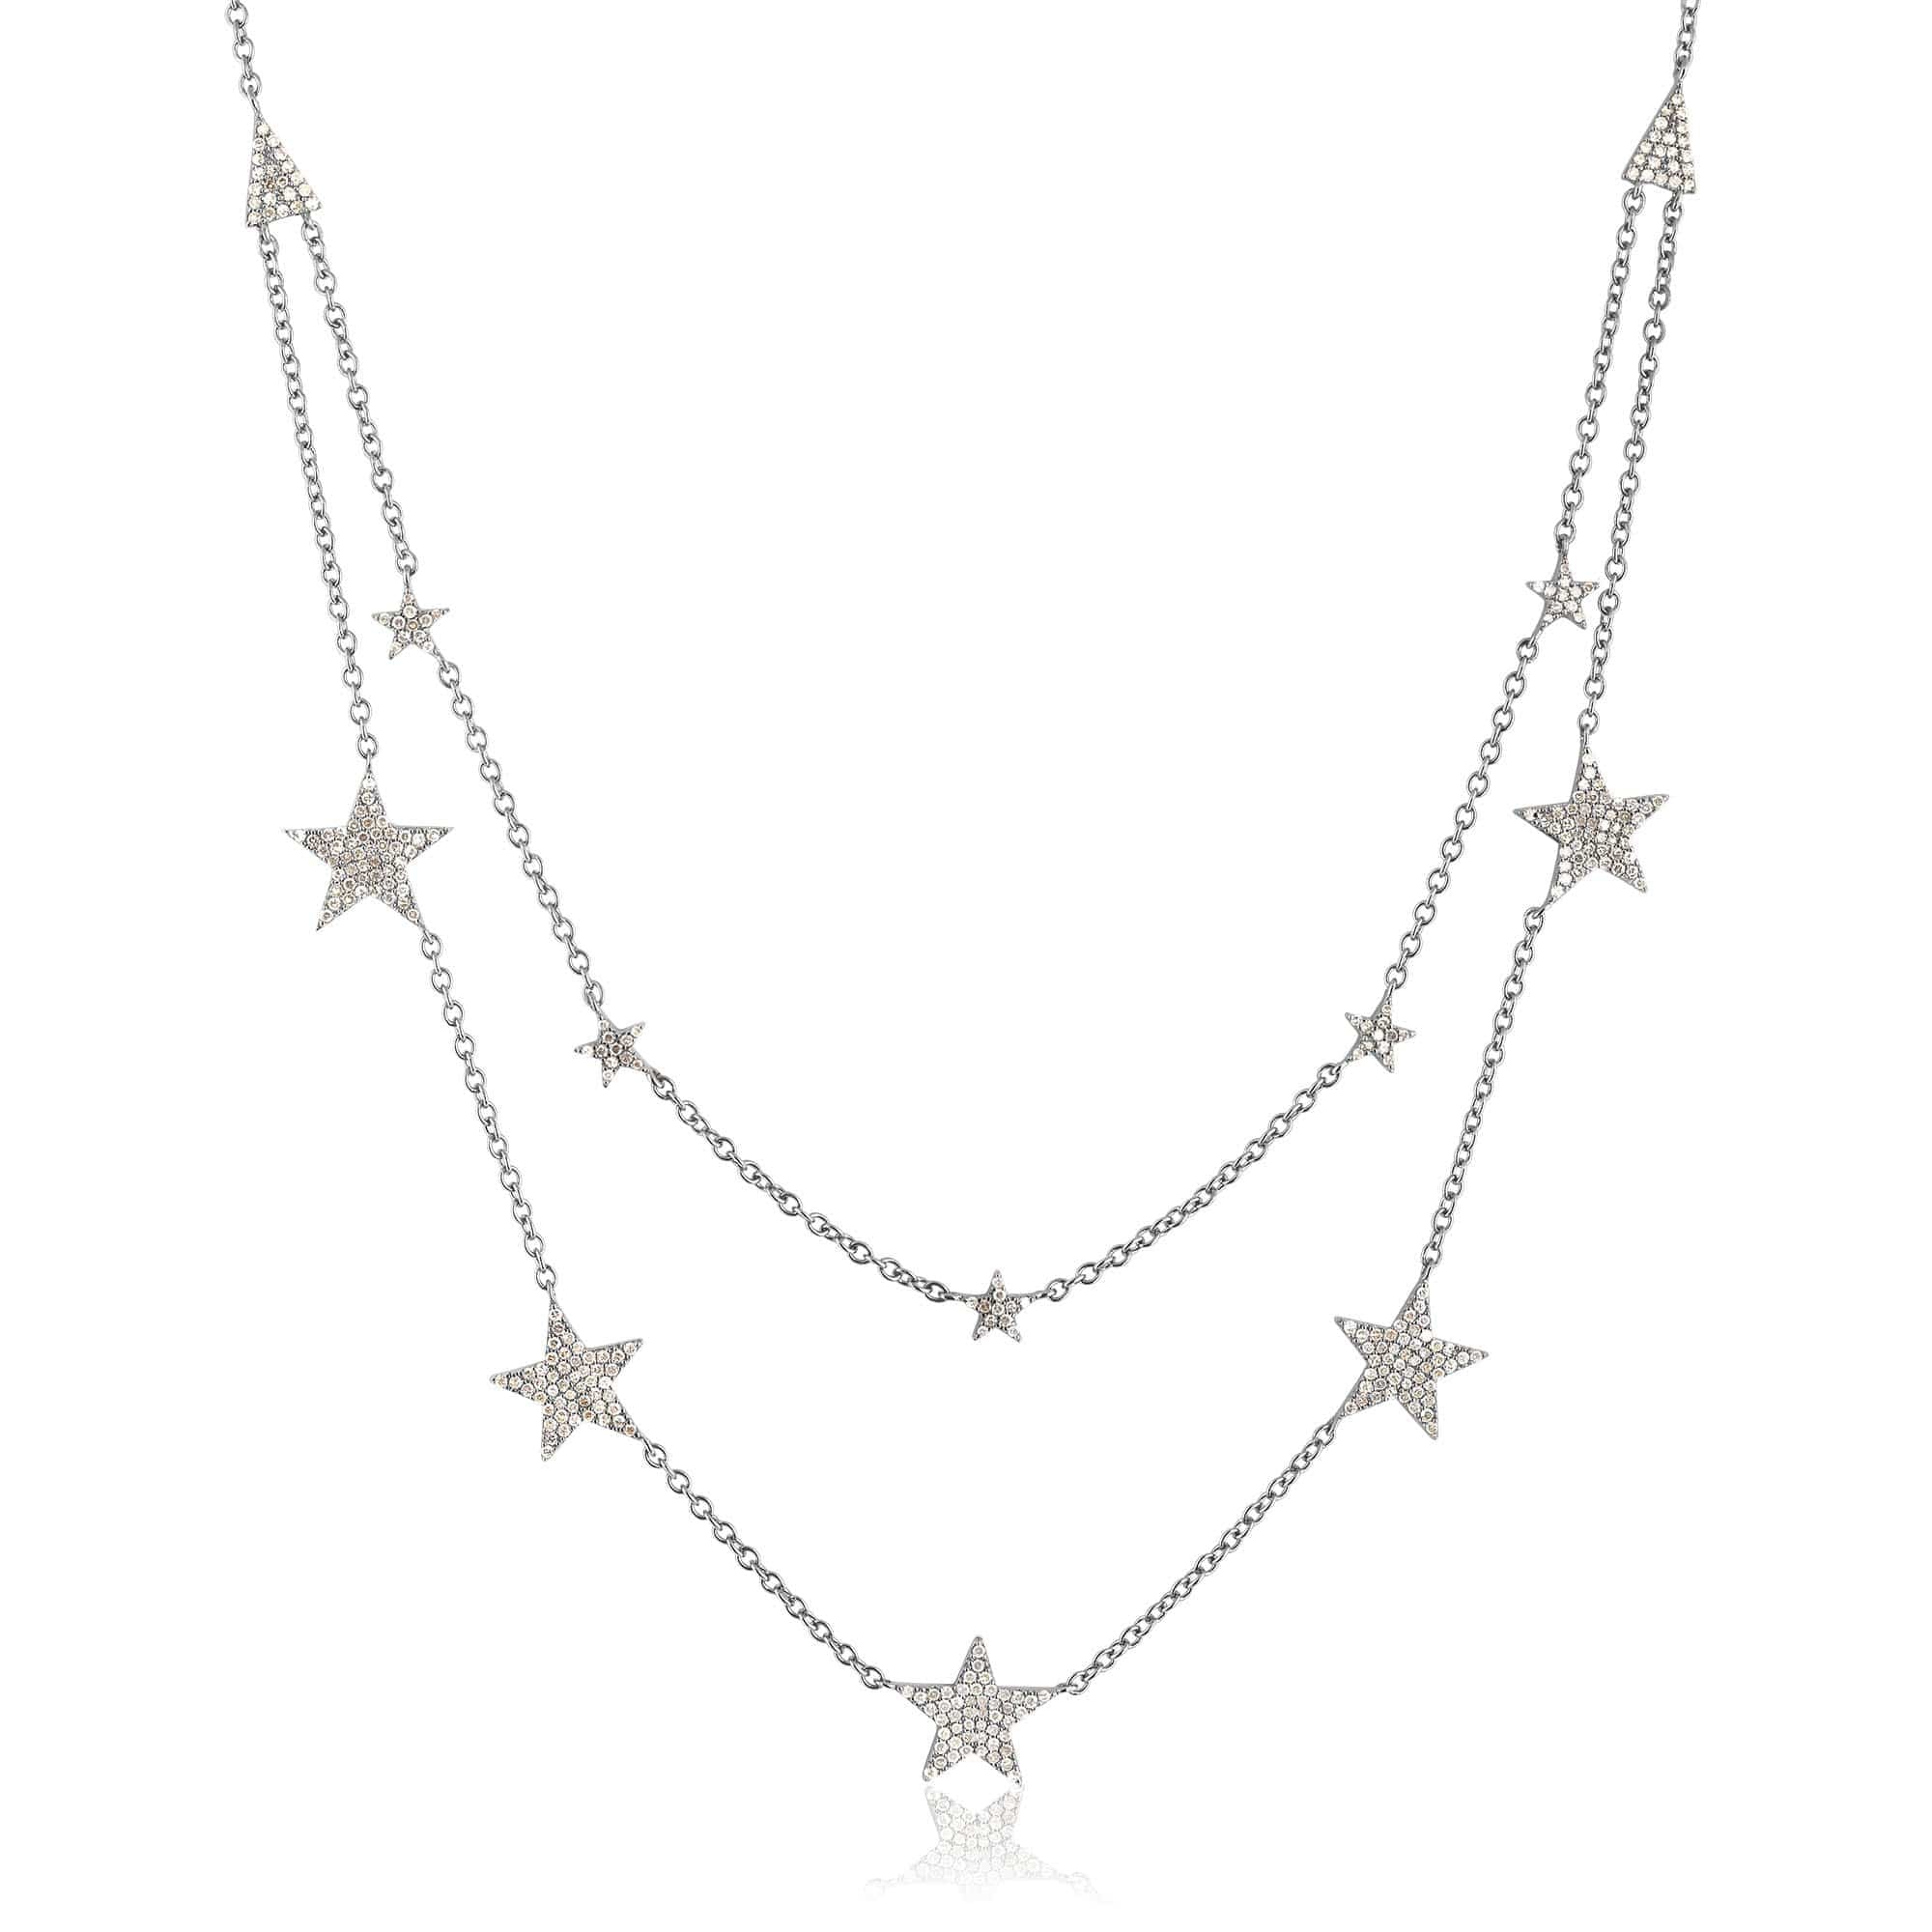 ela rae double star necklace diamond sterling silver